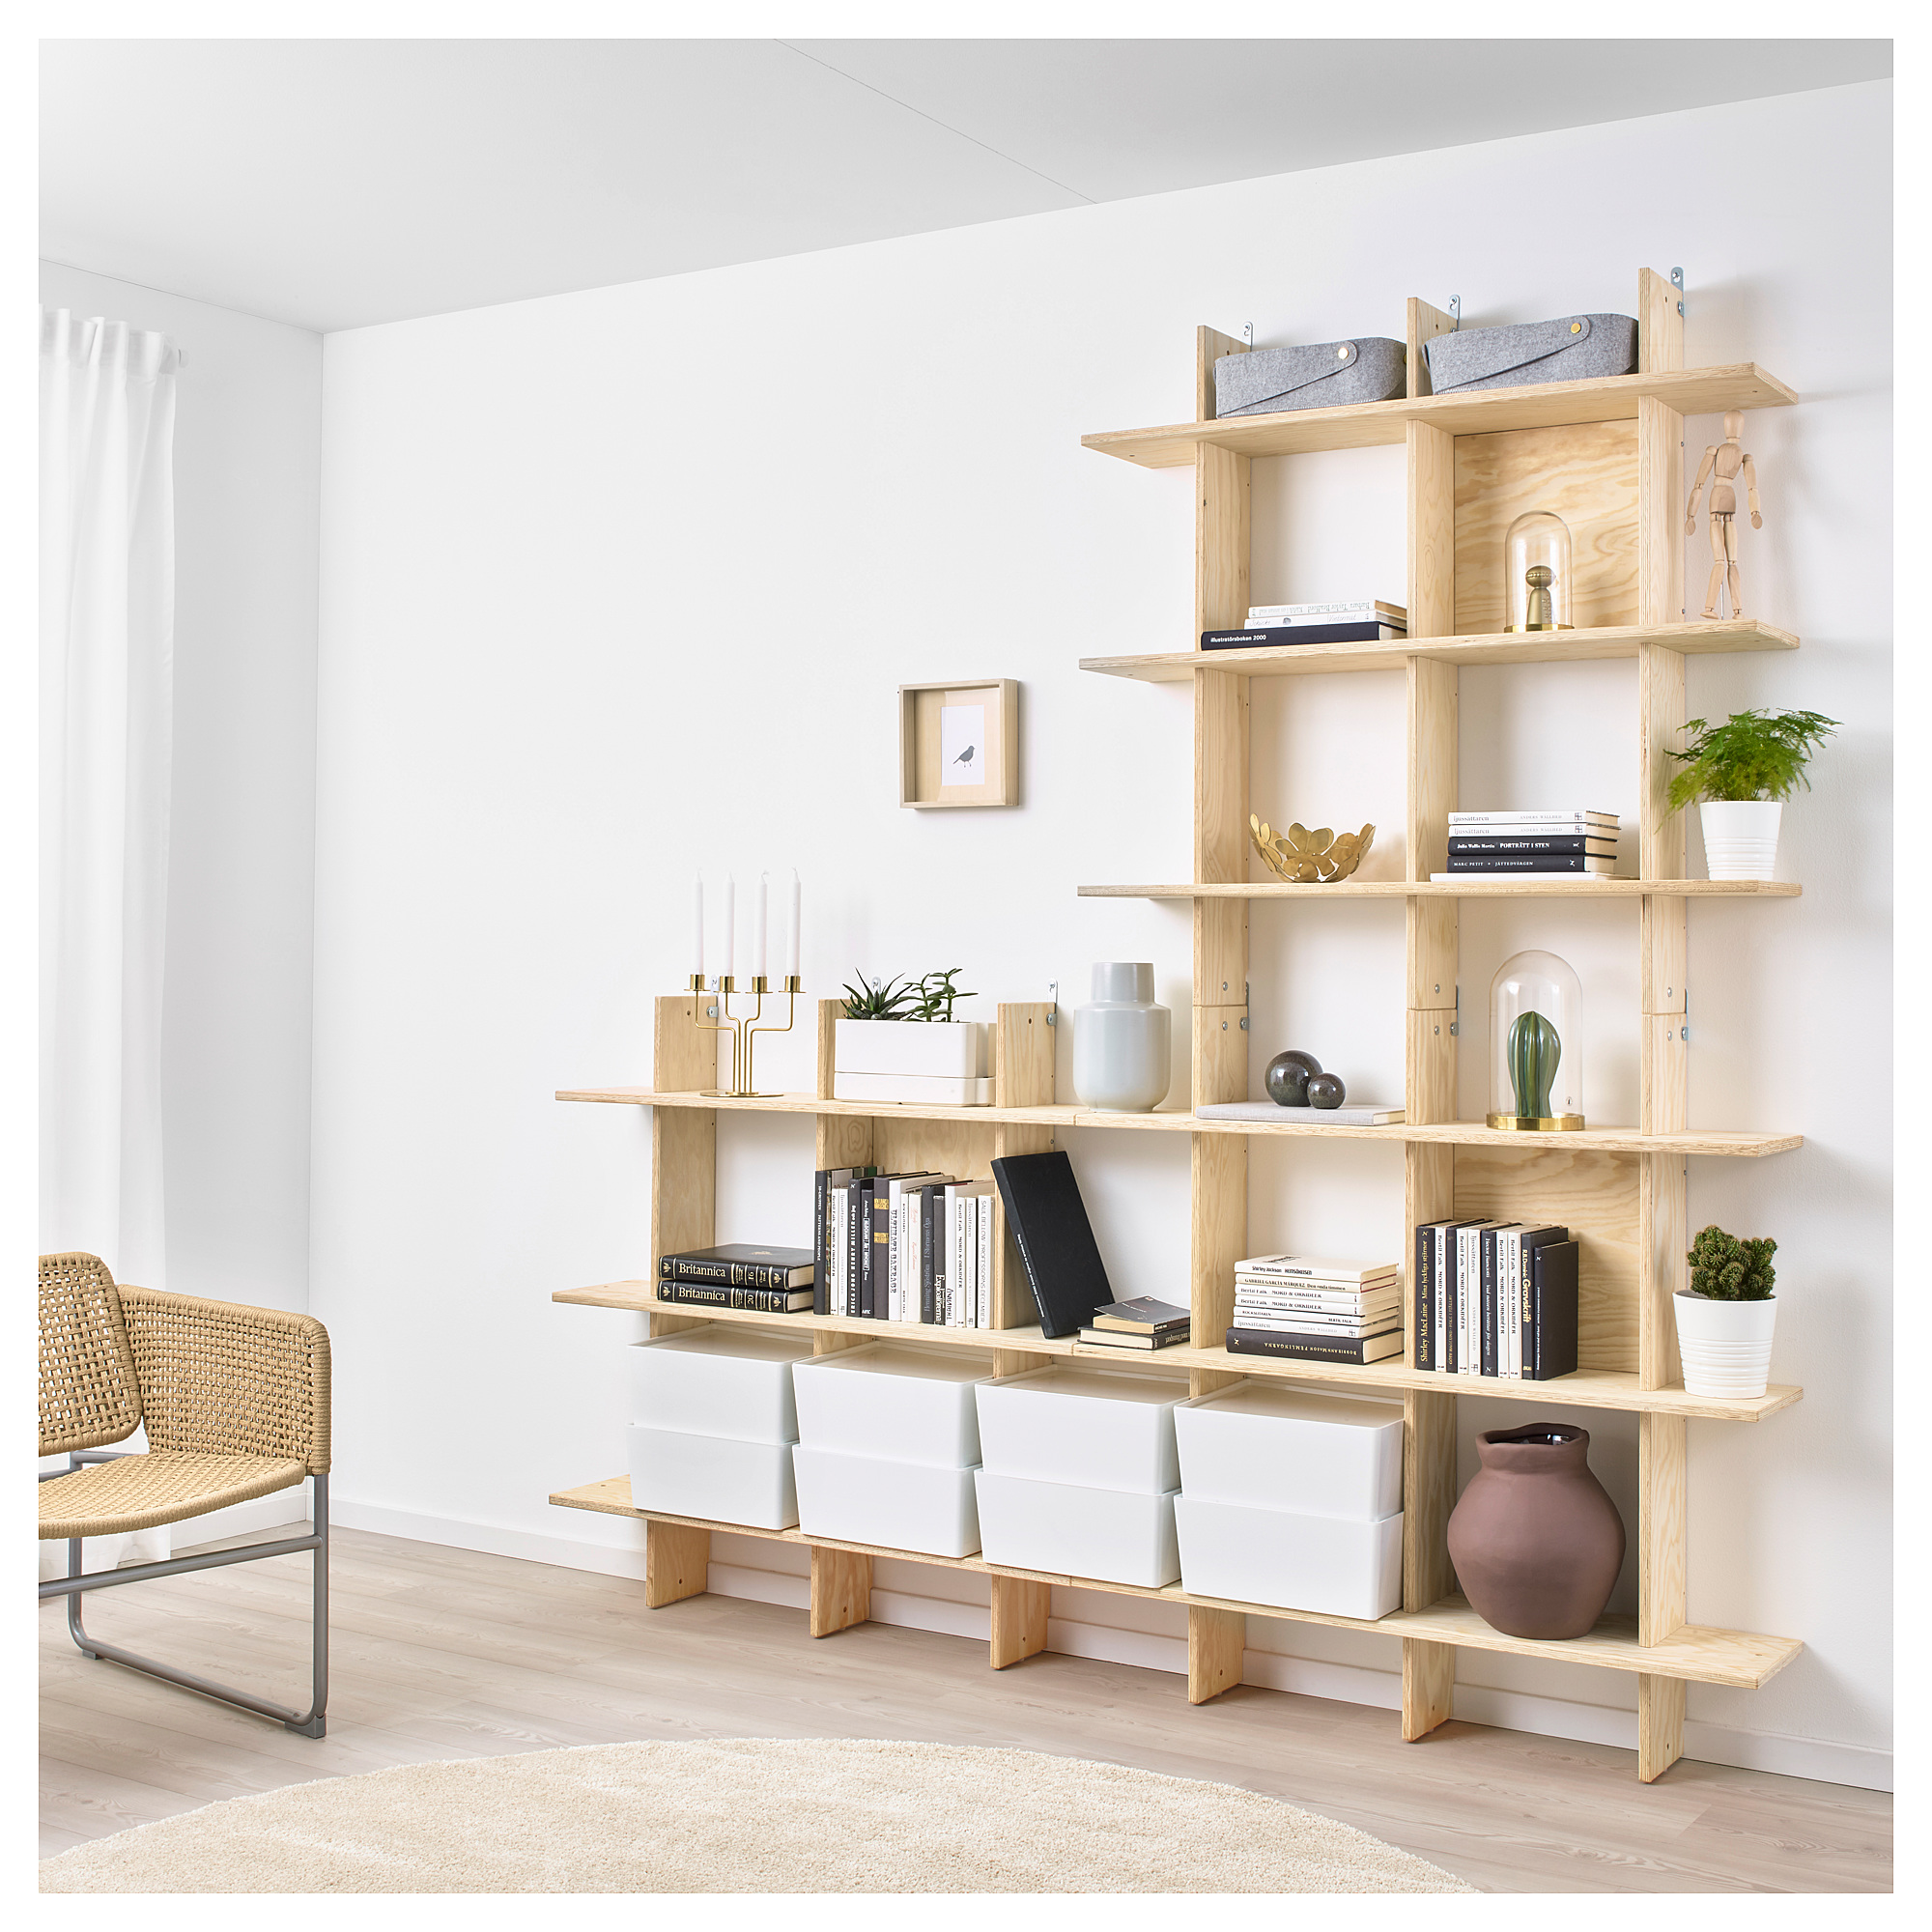 <h2><a href="https://www.ikea.com/ca/fr/catalog/products/00394549/" target="_blank" rel="noopener">Étagère</a></h2>
<p>INDUSTRIELL</p>
<p>99 $</p>
